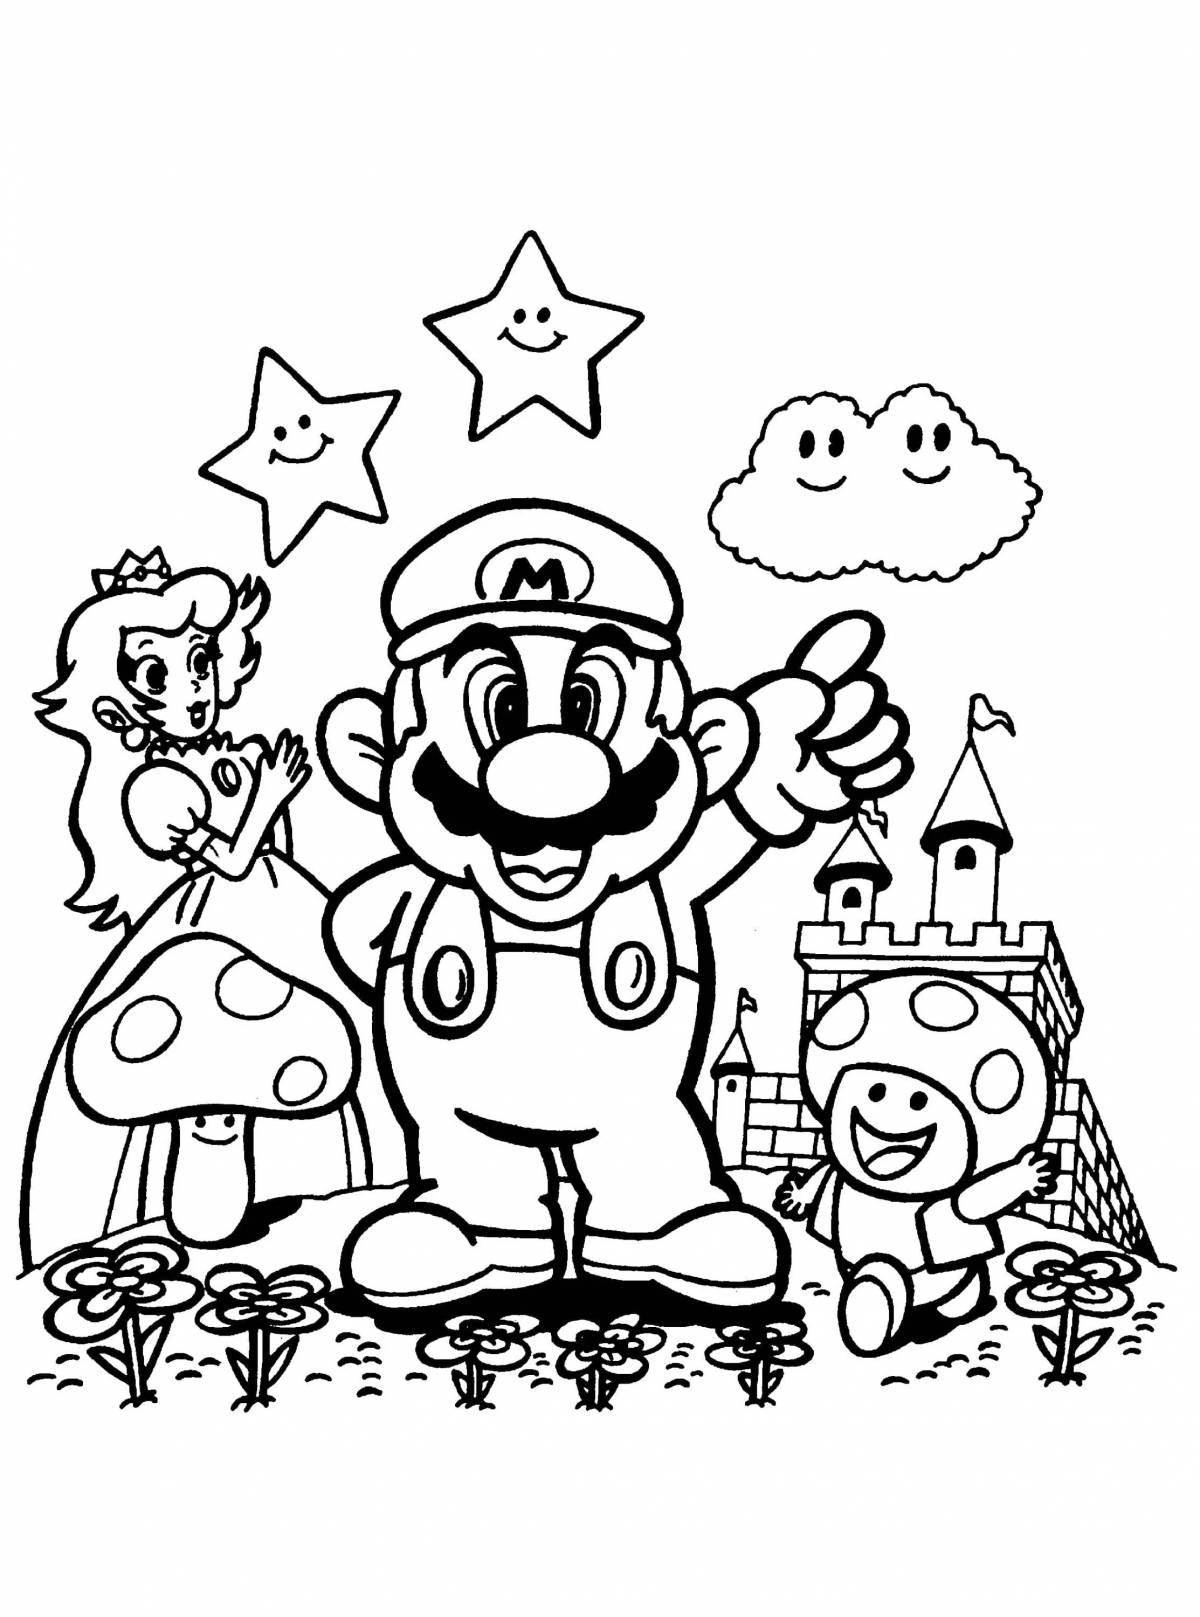 Drawing mario by numbers coloring book